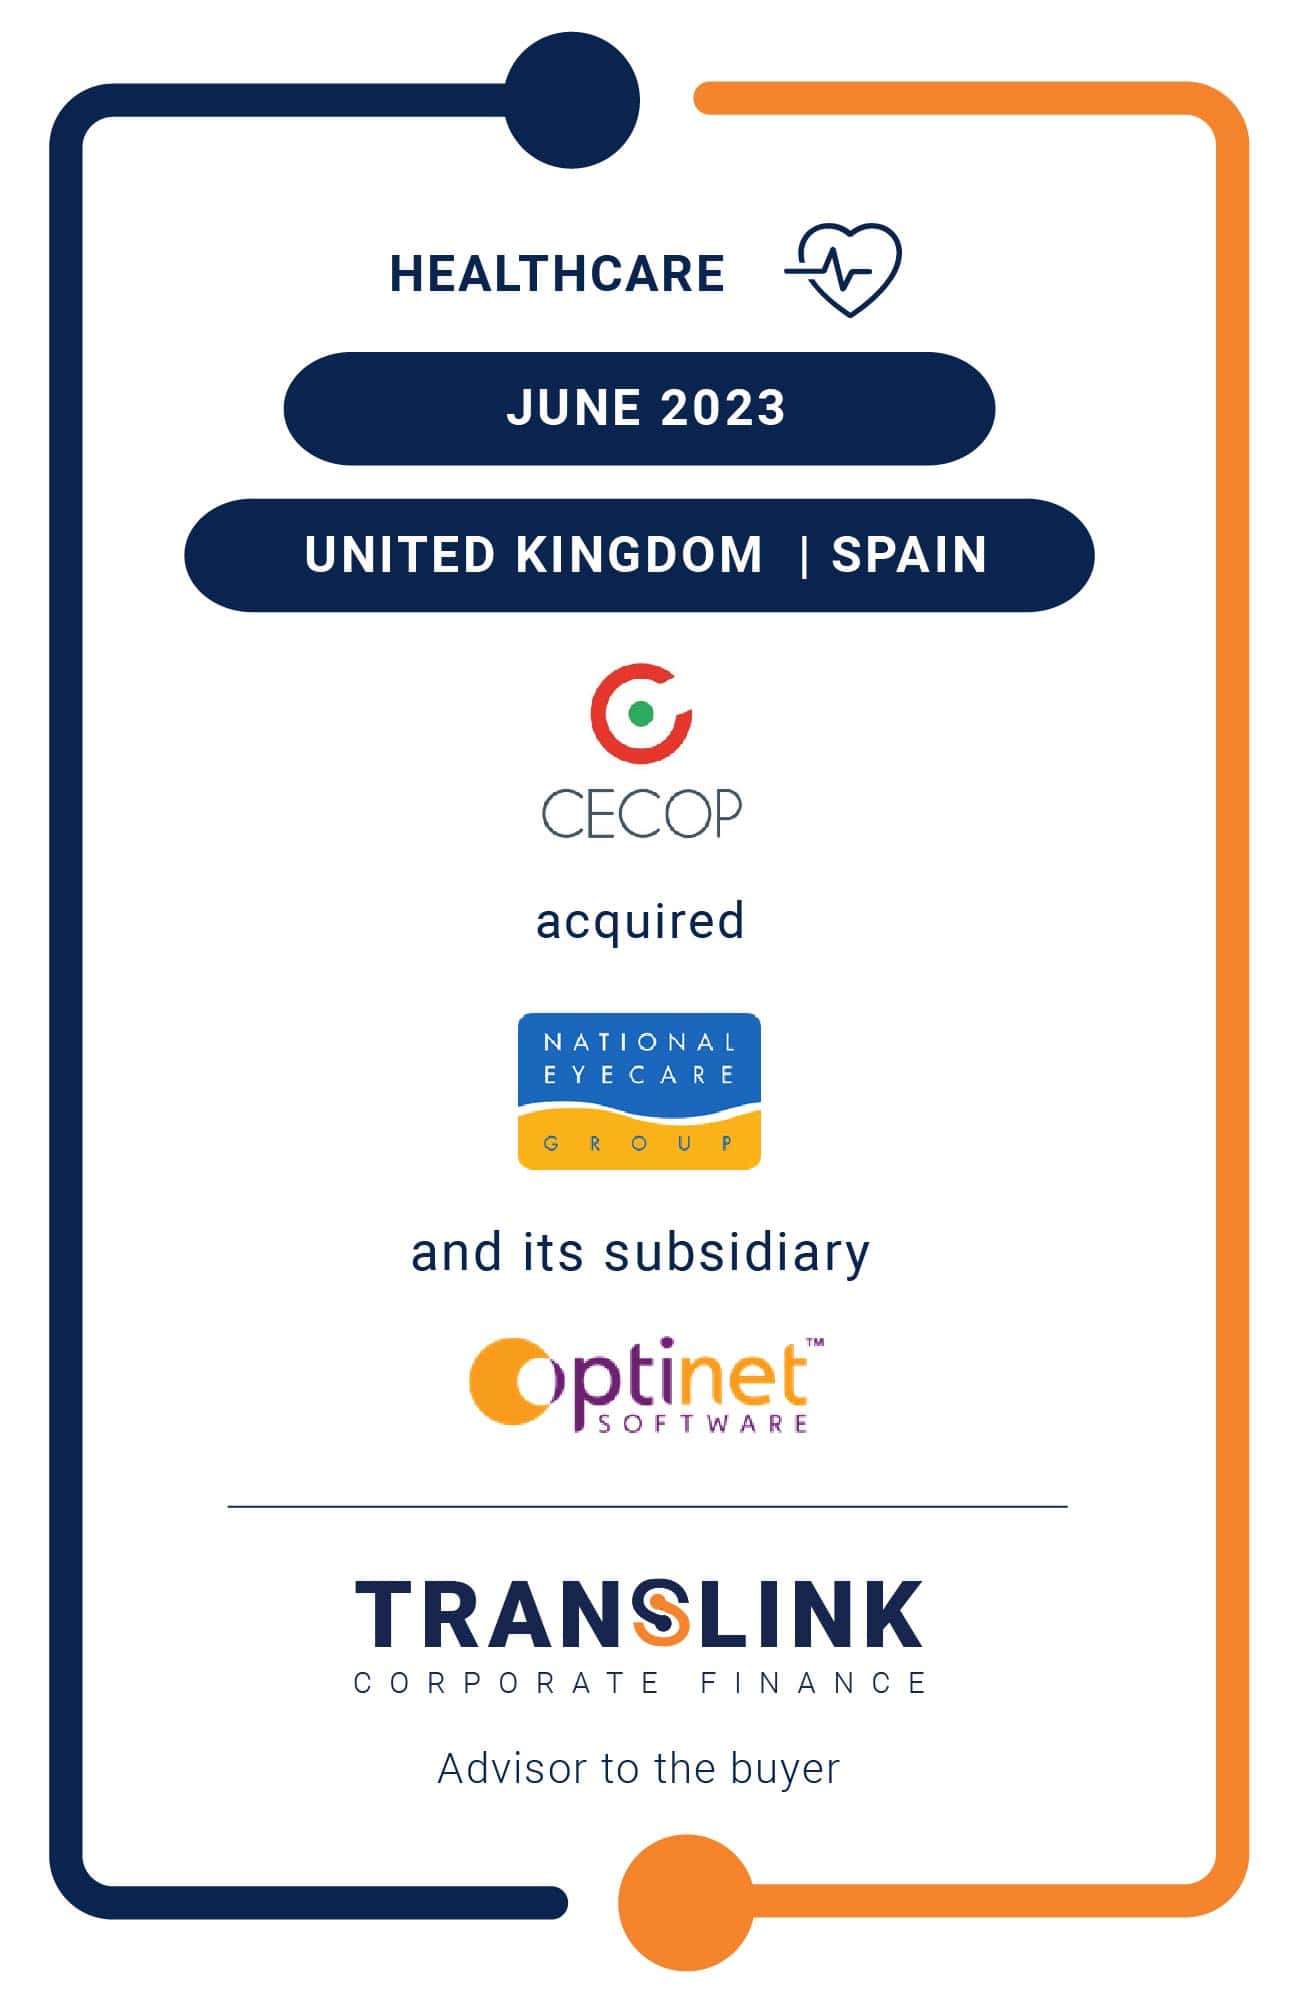 Translink Corporate Finance Acted As The Advisor To CECOP On The Acquisition Of National Eyecare Group and its subsidiary, Optinet